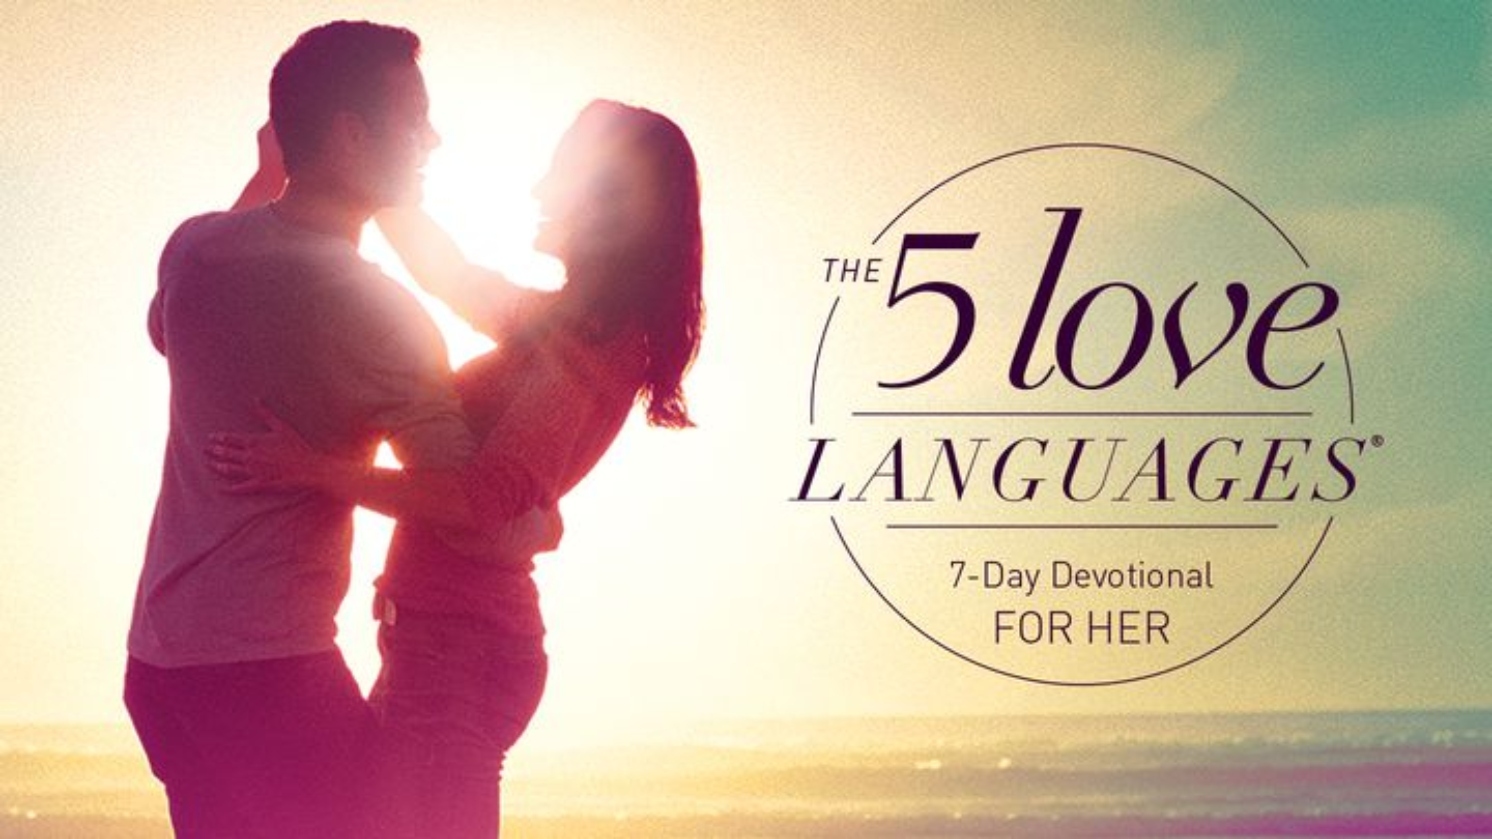 The 5 Love Languages for Her